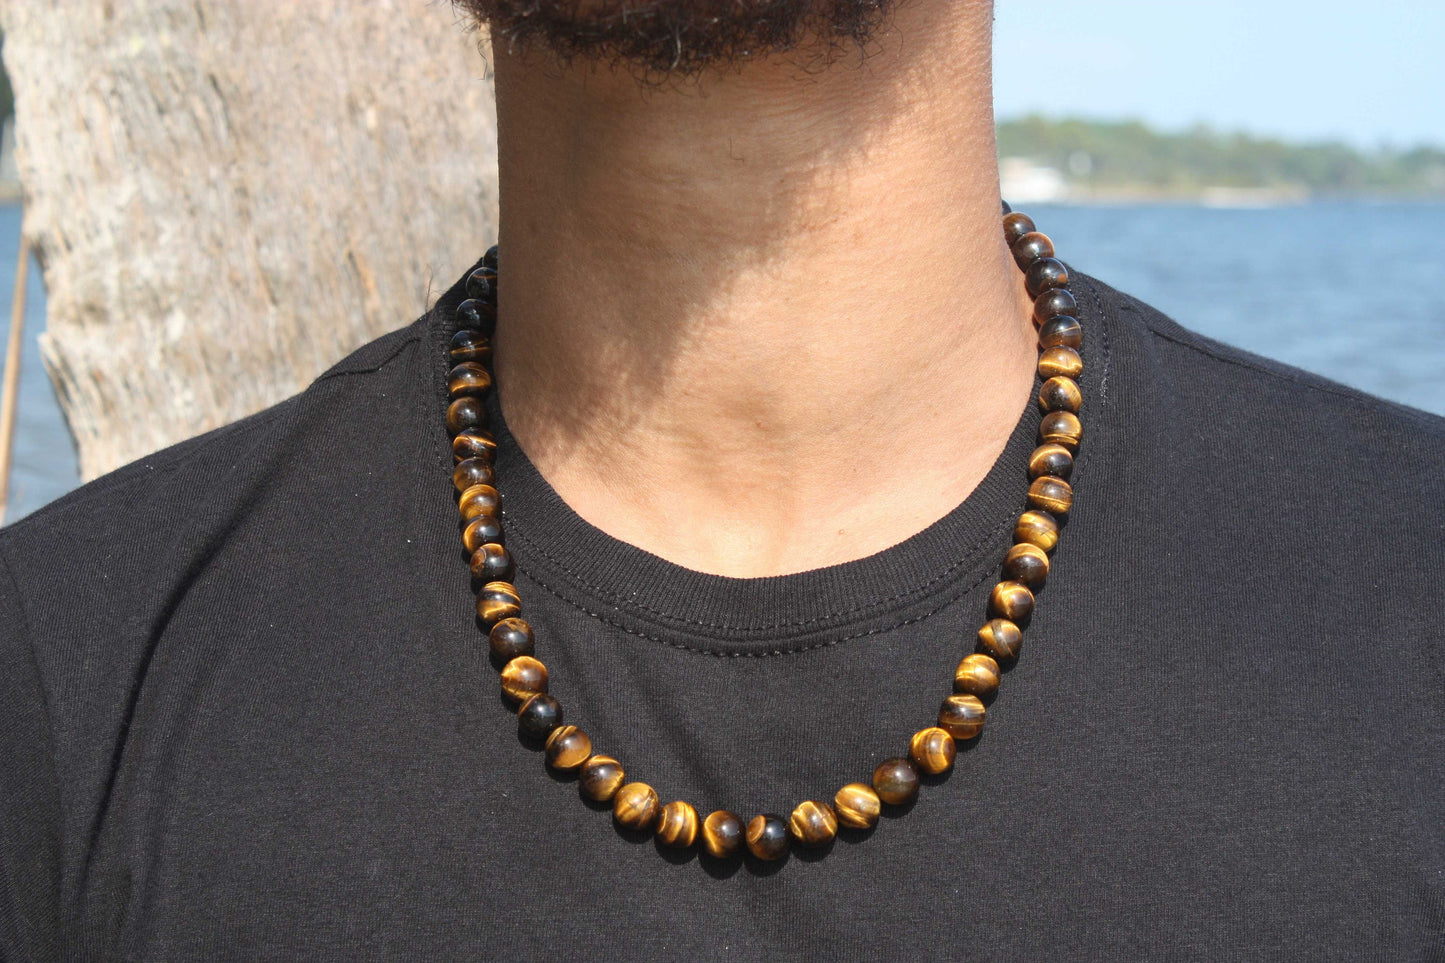 10mmTiger Eye Necklace - Mens Necklace - Beaded Necklace - Tribal Necklace - Good Luck - Confidence Gemstone Jewelry for Men/Women